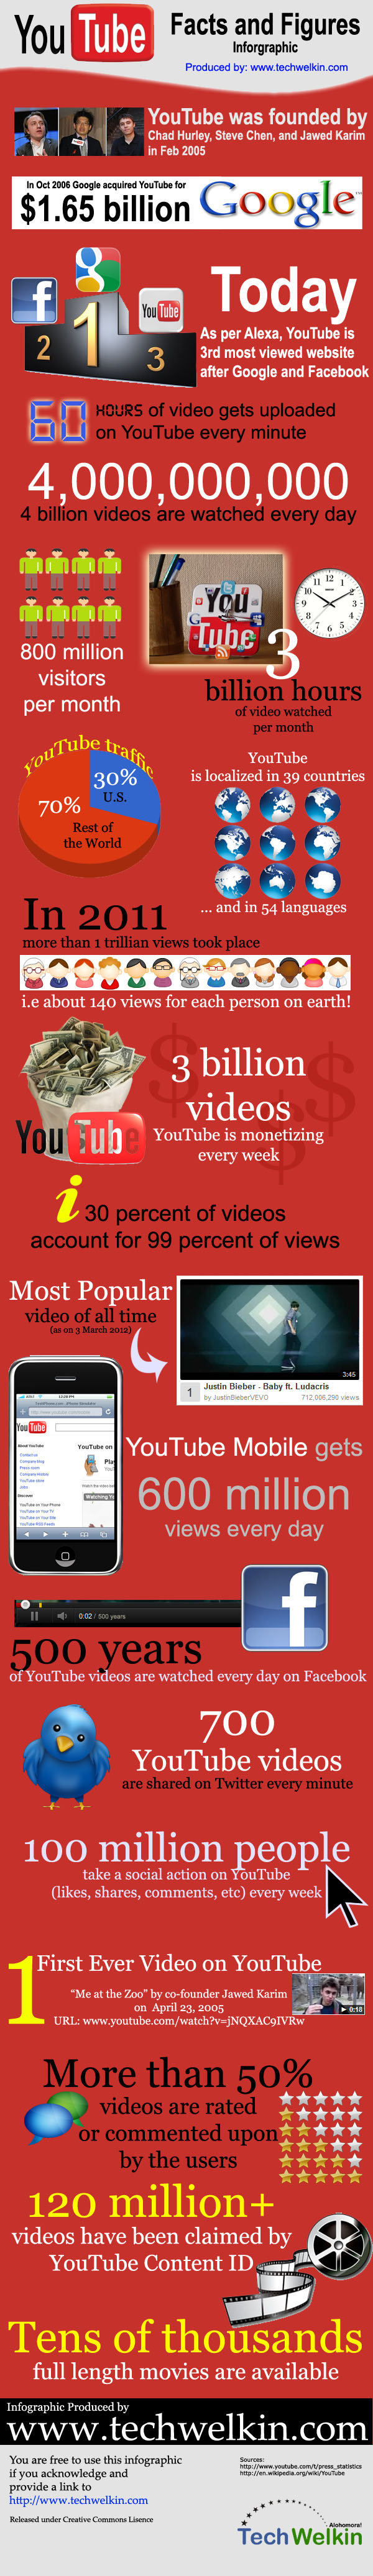 YouTube facts and figures